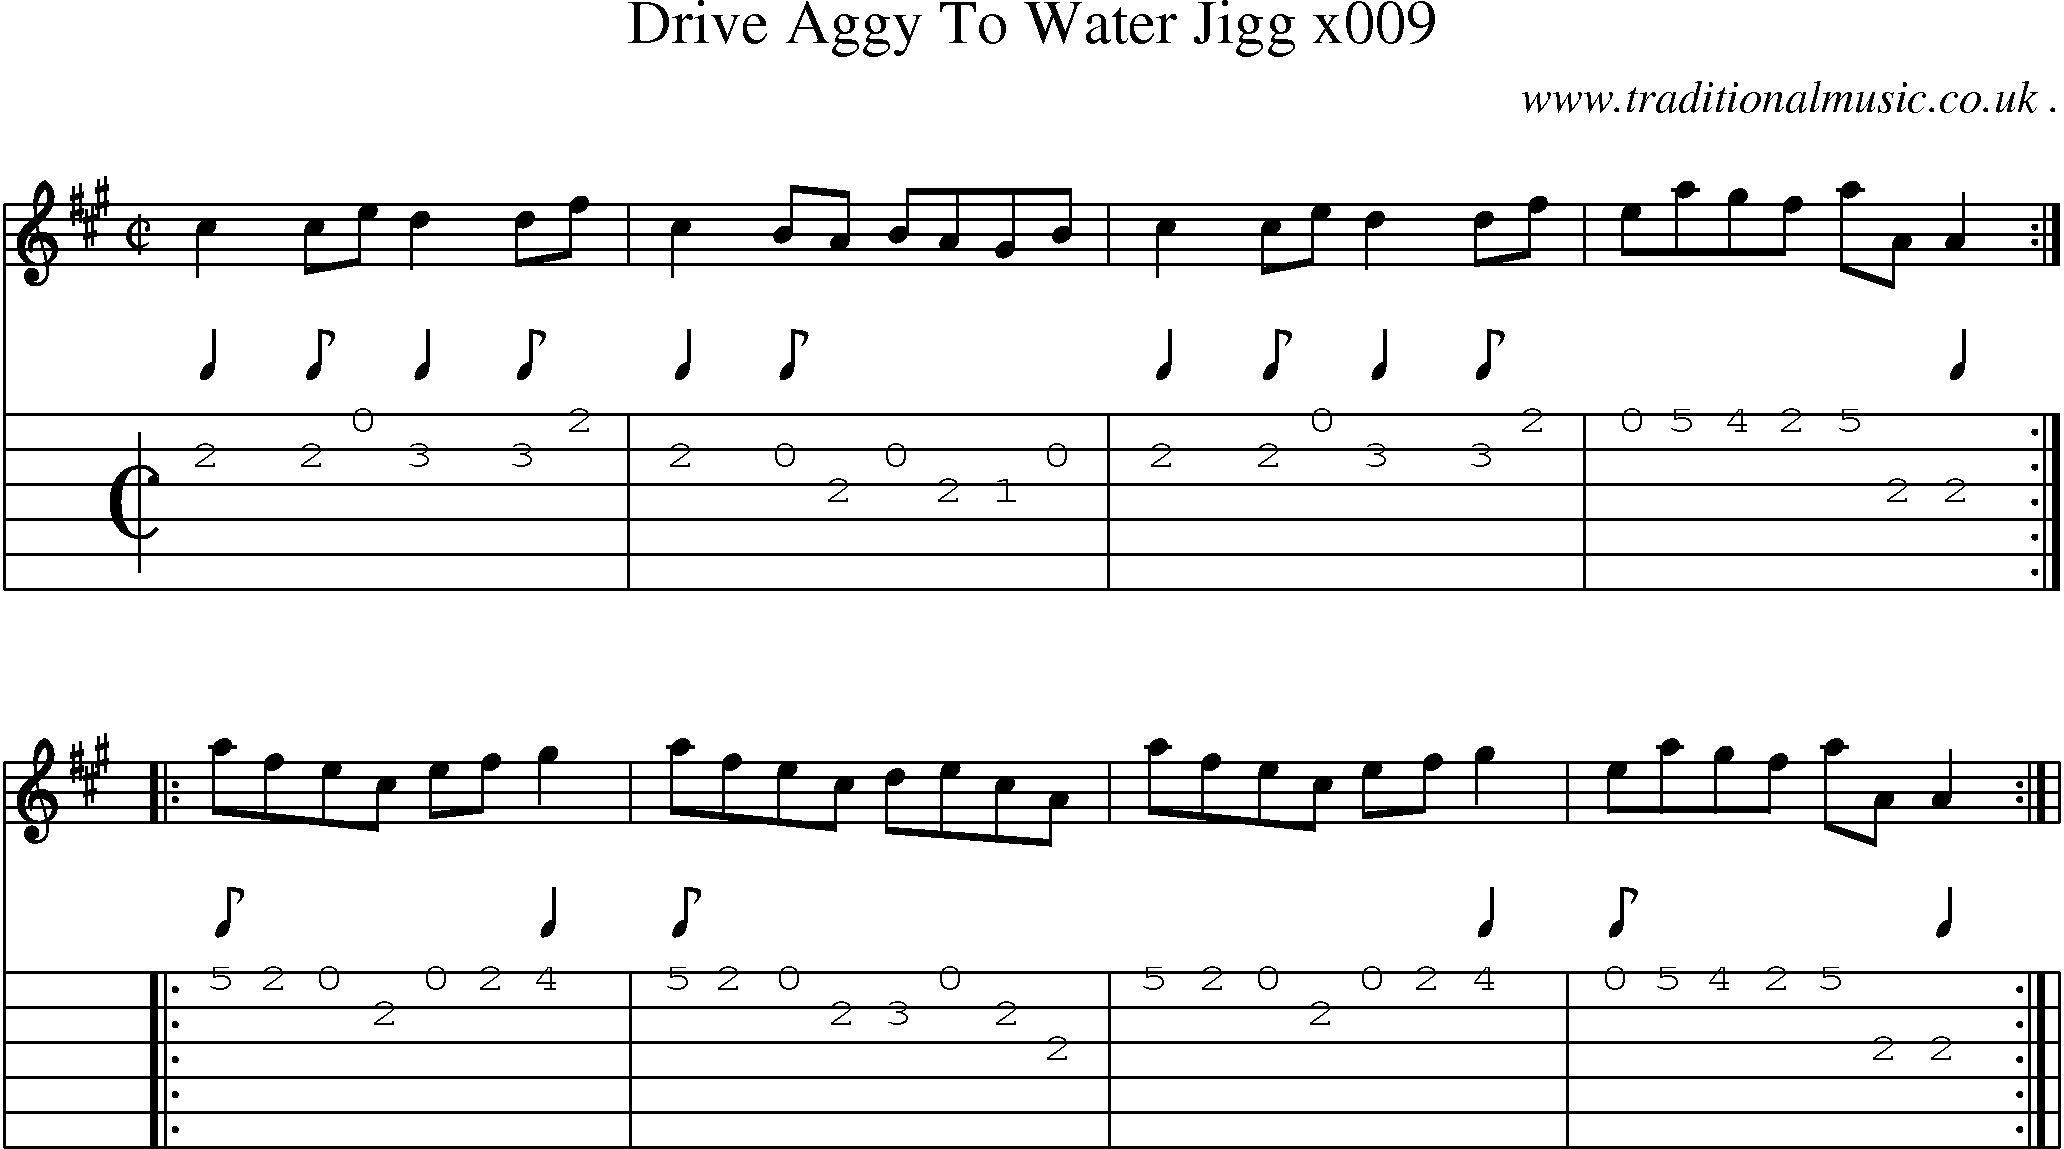 Sheet-Music and Guitar Tabs for Drive Aggy To Water Jigg X009